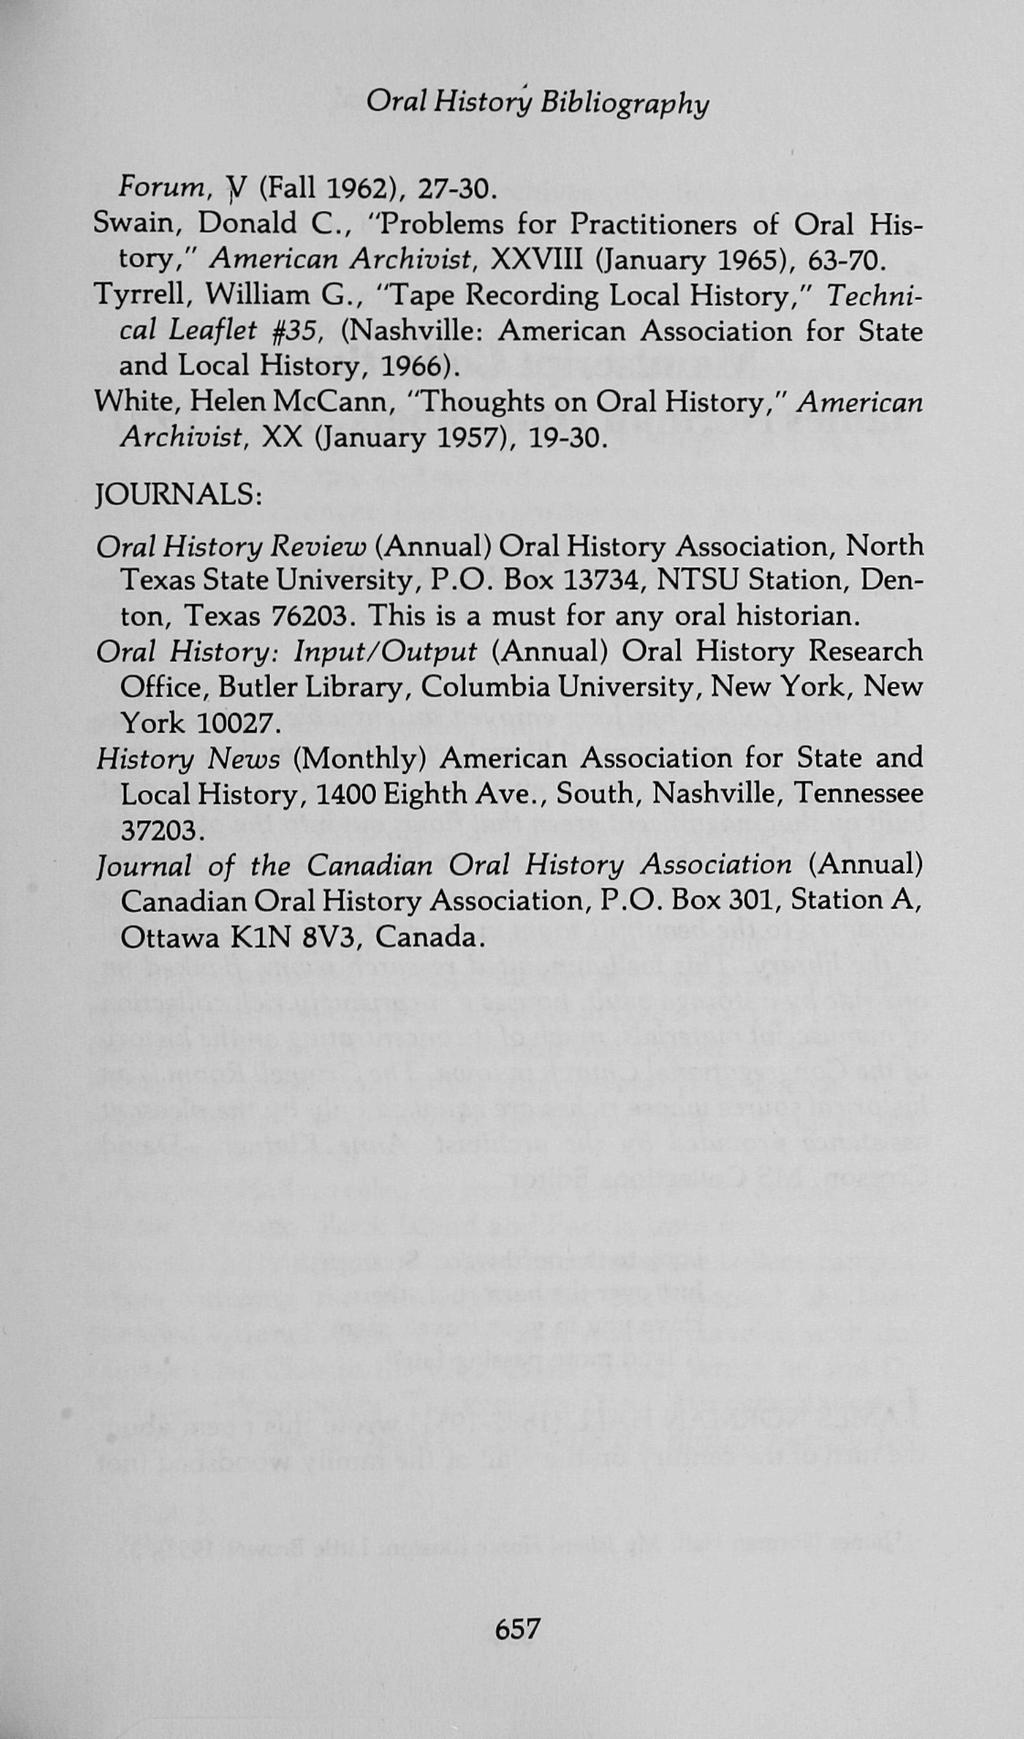 Oral History Bibliography Forum, y (Fall 1962), 27-30. Swain, Donald C, "Problems for Practitioners of Oral History," American Archivist, XXVIII (January 1965), 63-70. Tyrrell, William G.